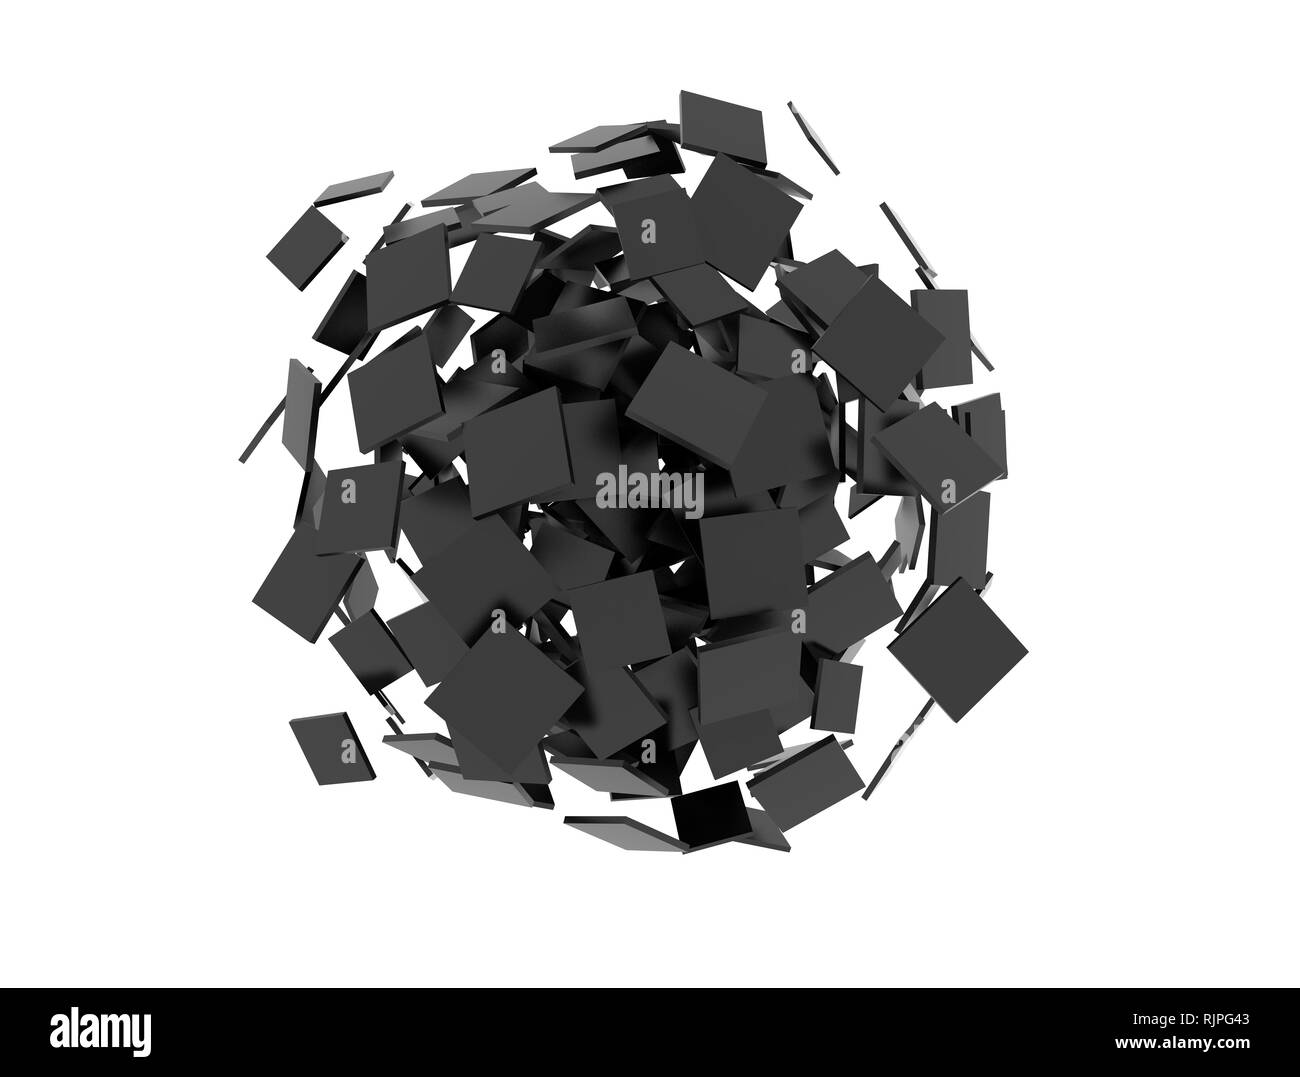 Abstract cluster made of black blank 3d squares Stock Photo